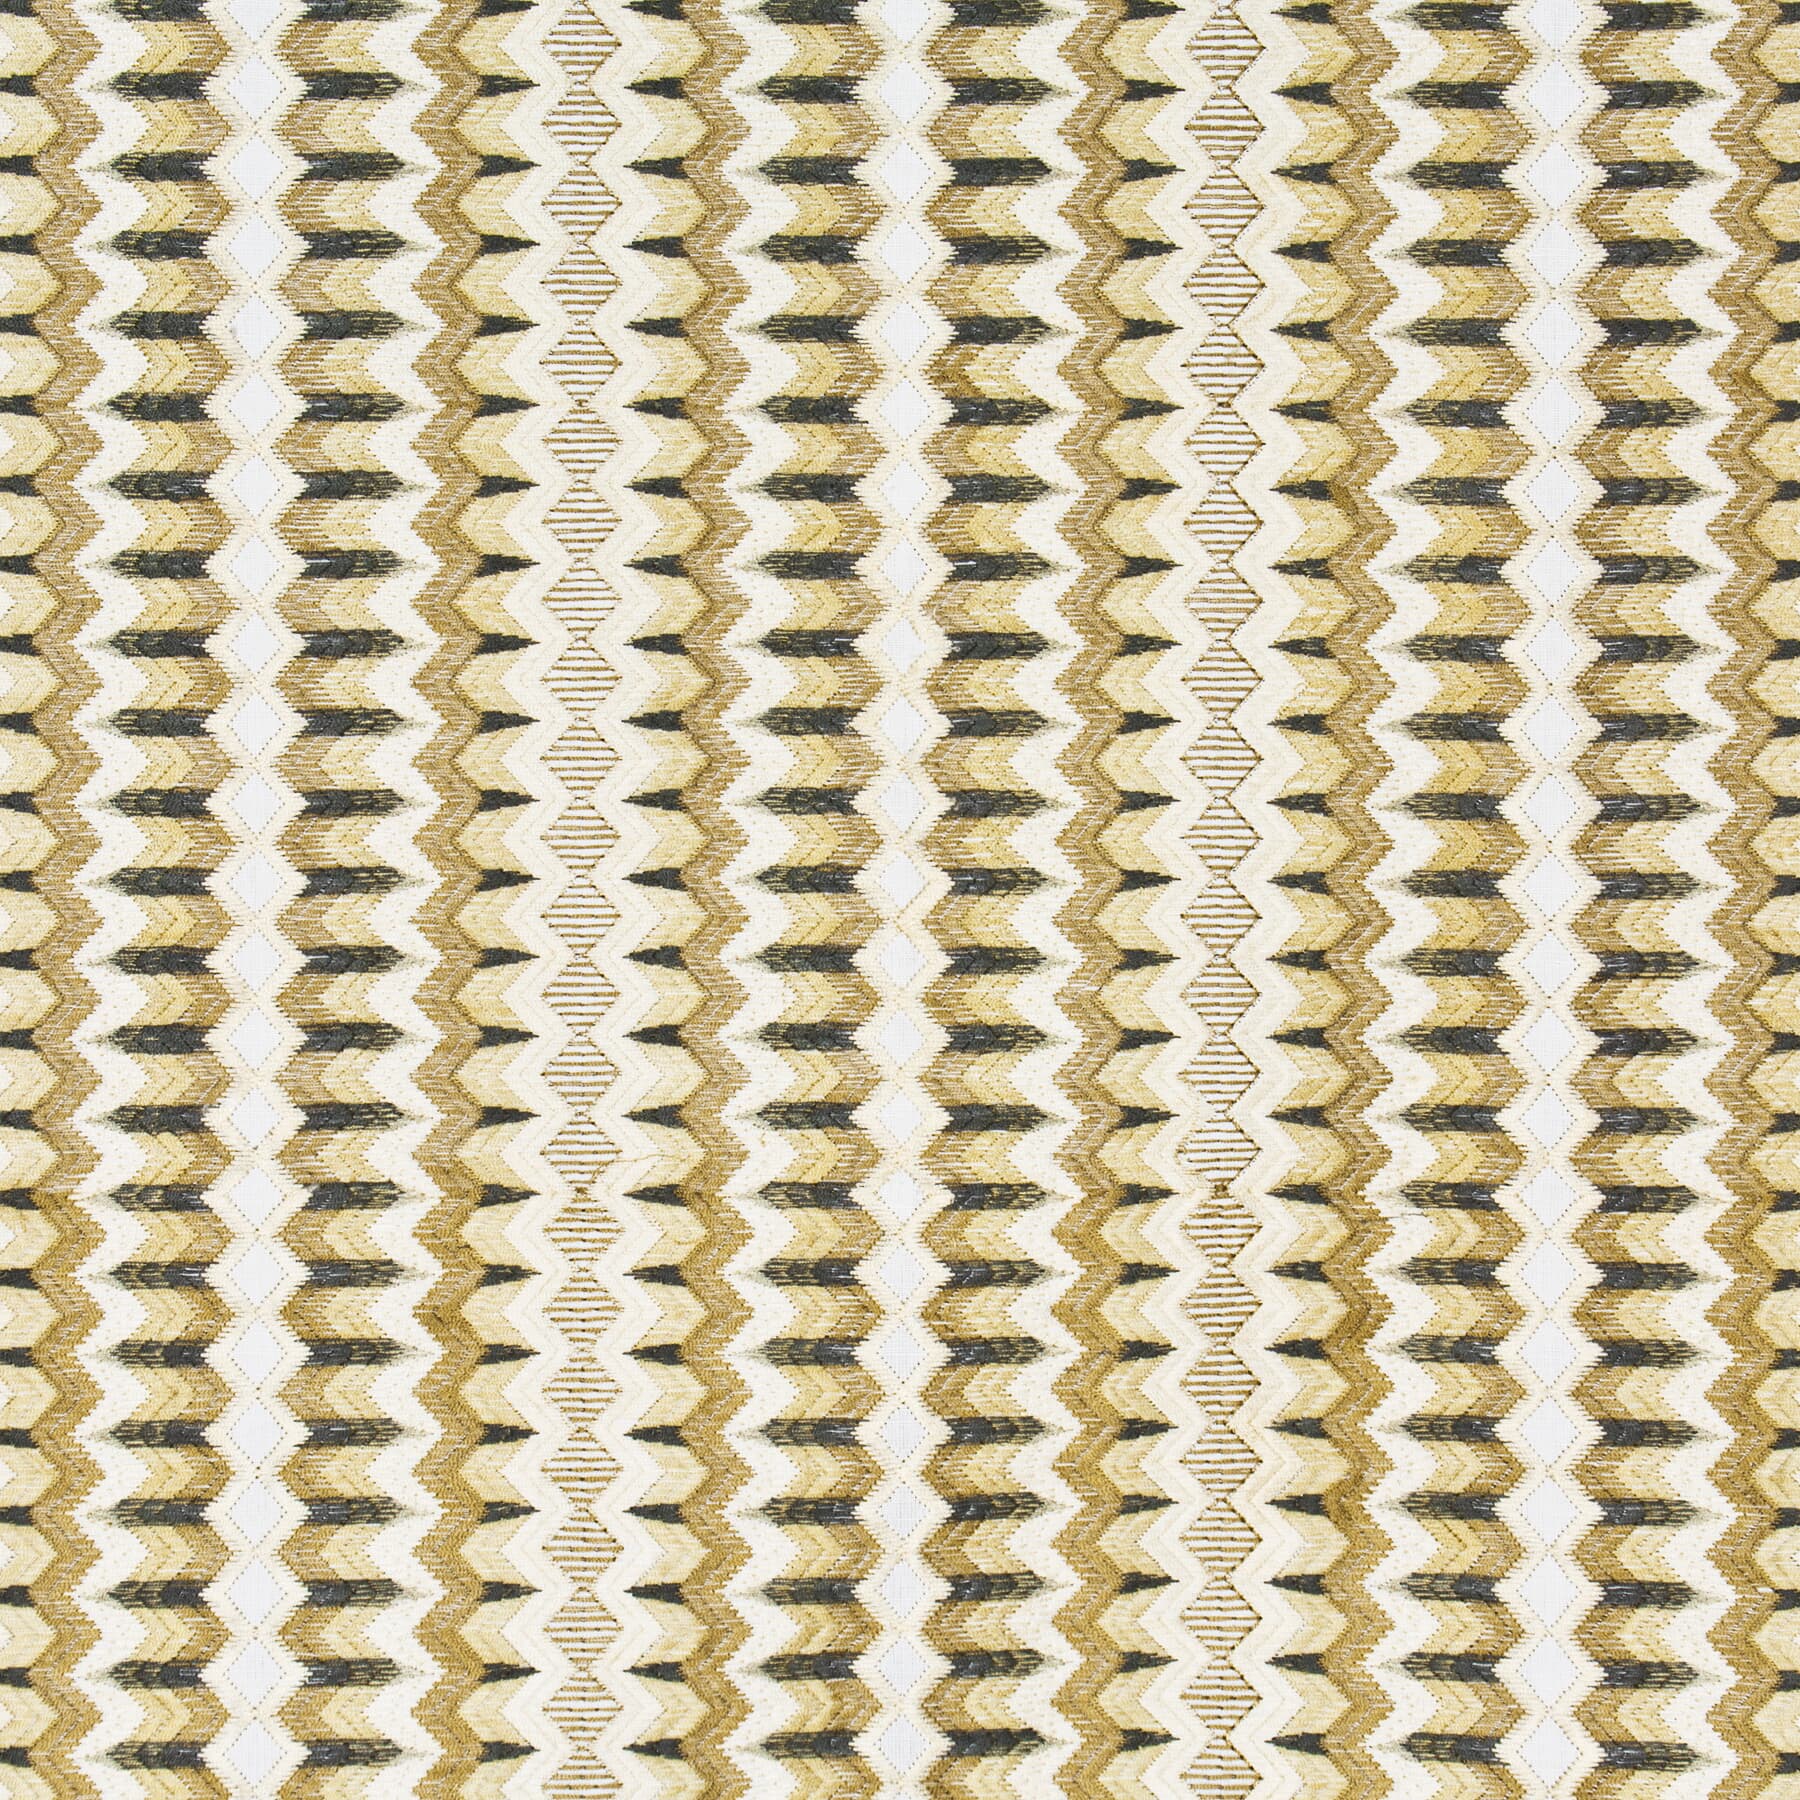 Offpeak 2 Sandstone by Stout Fabric